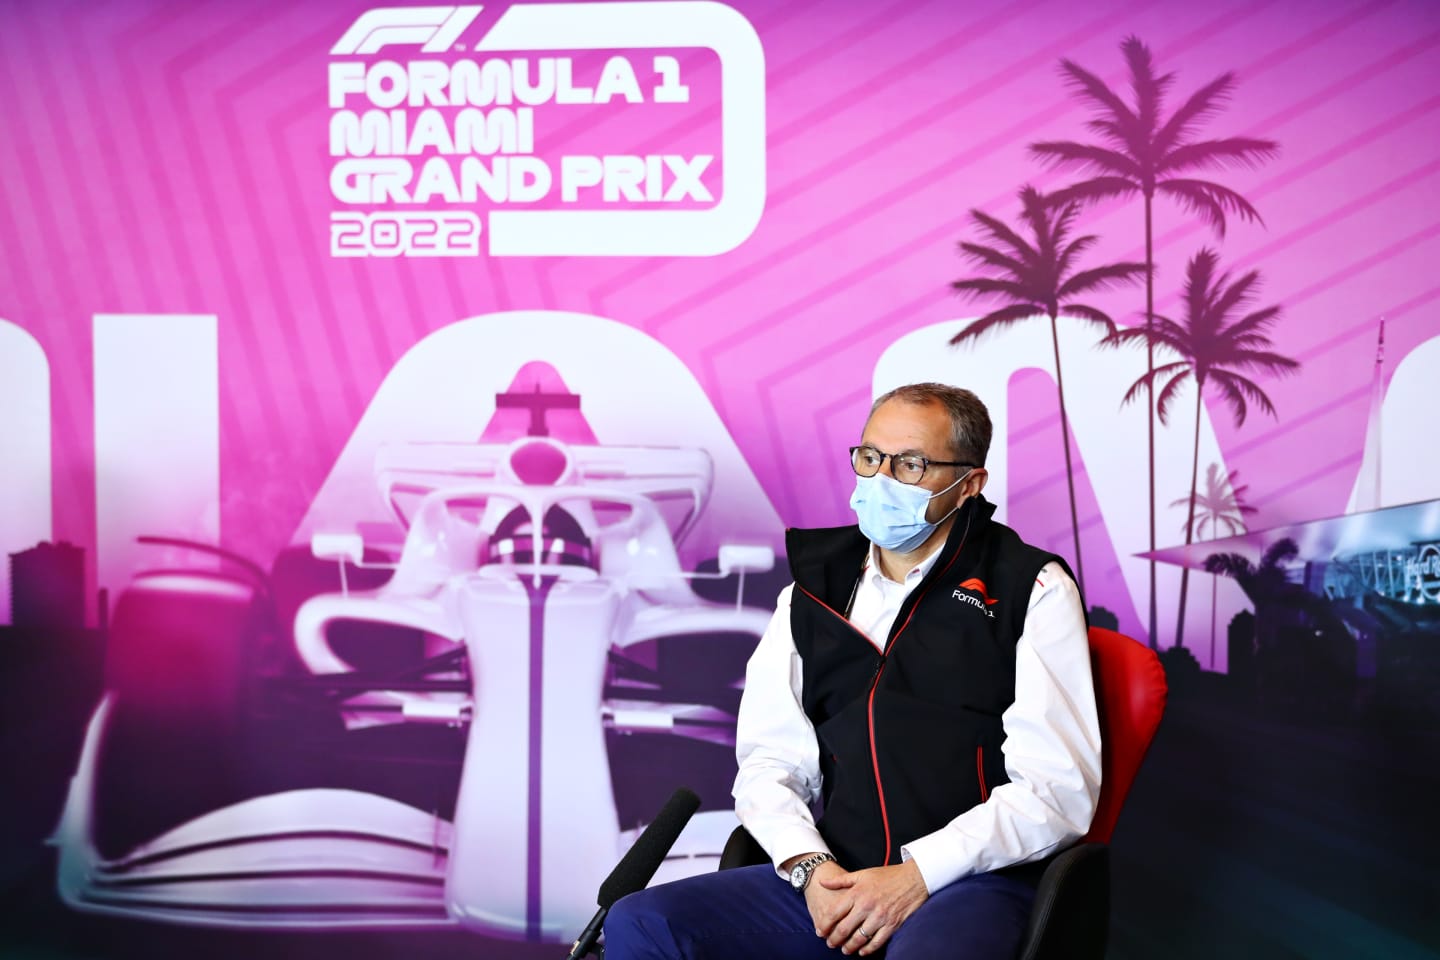 IMOLA, ITALY - APRIL 18: Stefano Domenicali, CEO of the Formula One Group, talks in a press